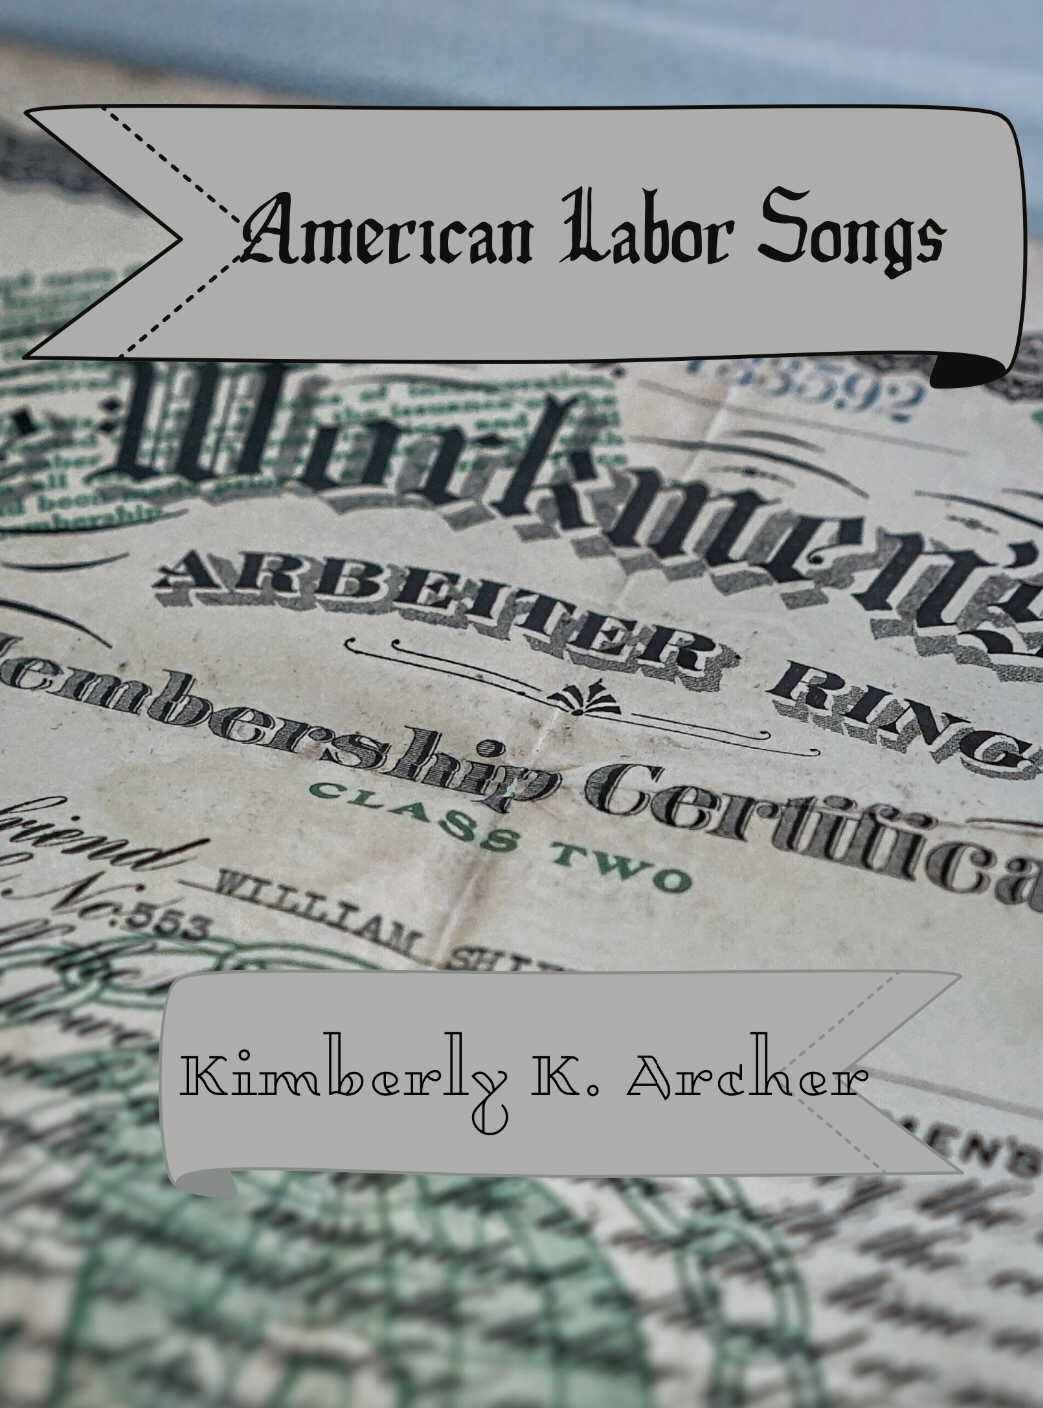 American Labor Songs by Kimberly Archer 